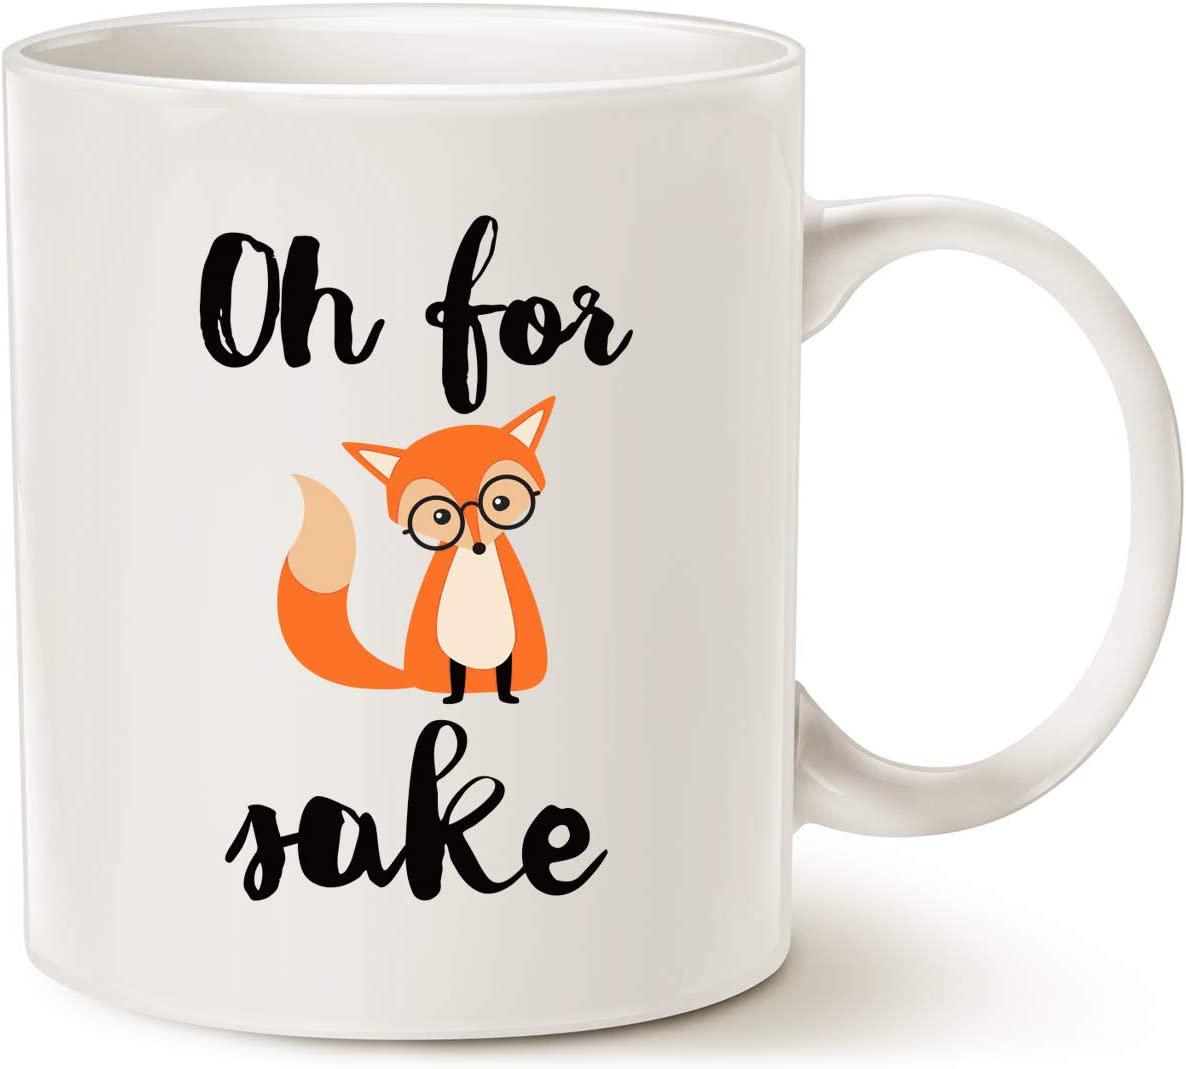 This Might be Wine, Funny Quote Fox Coffee Mug, Oh for Fox Unique Cute Birthday Gifts for Friend Cute Porcelain Cup White 11 Oz